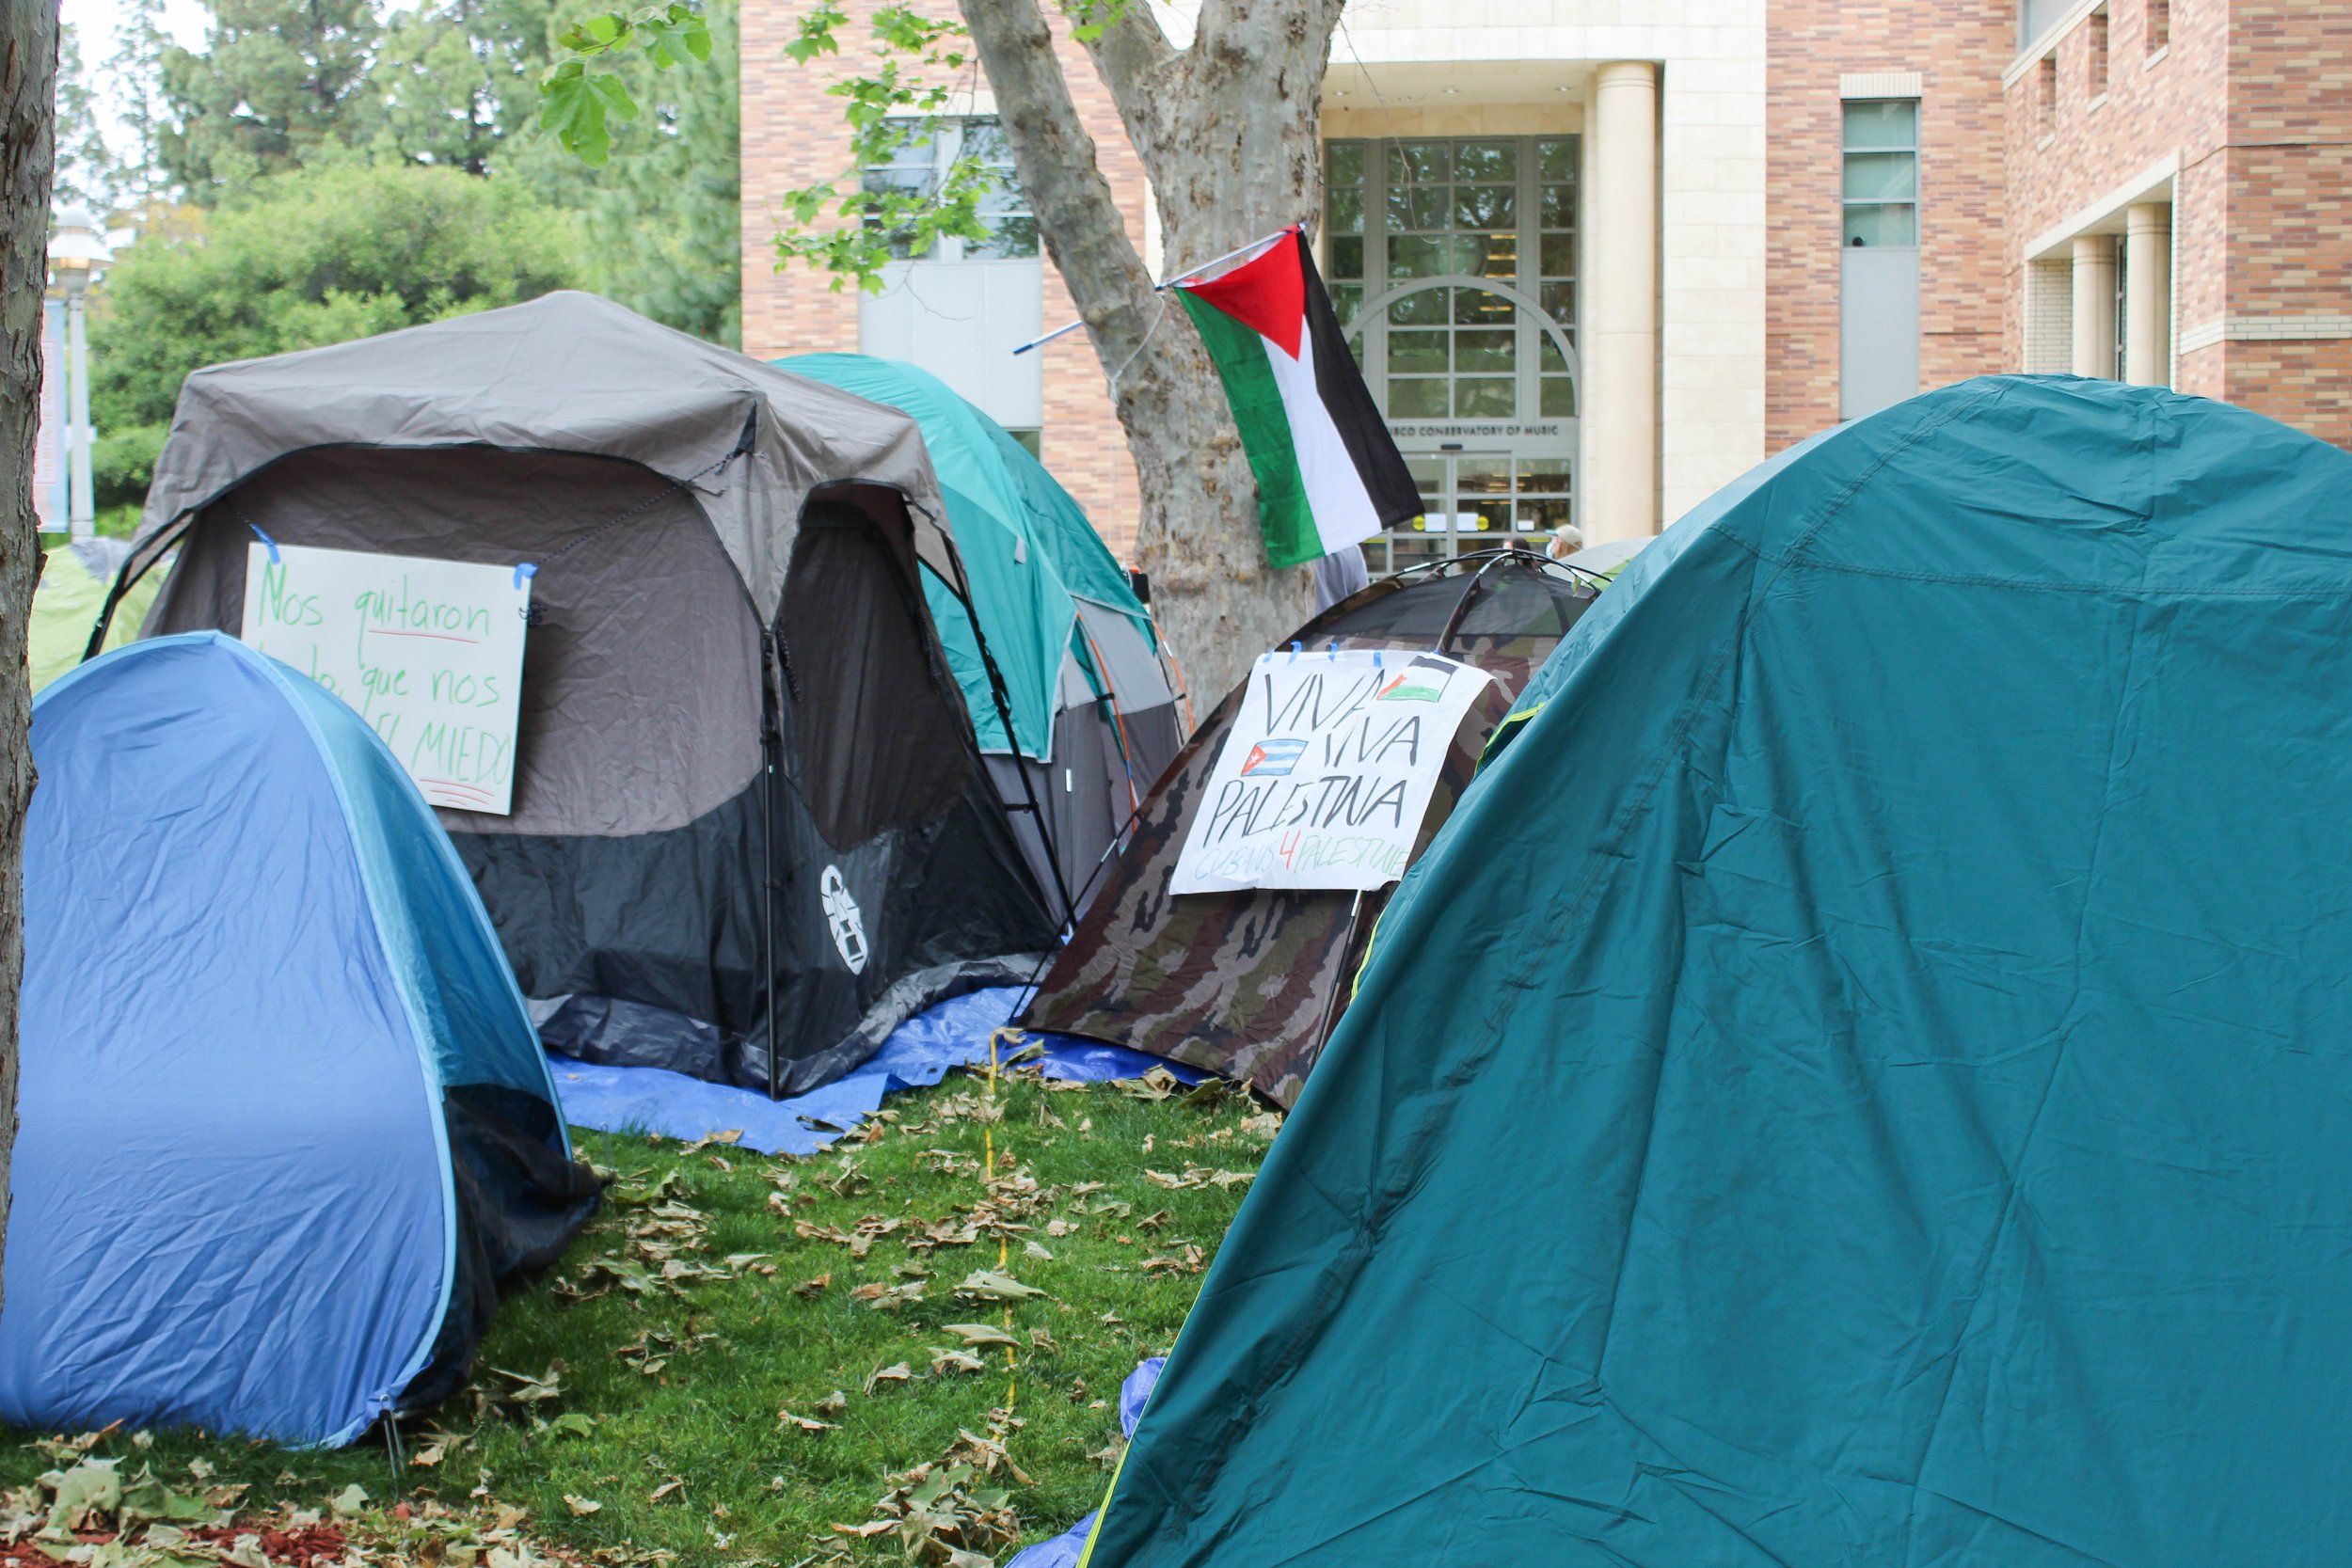    Tents at the encampment. Protestors slept on-campus over the weekend, which offered its own set of activities for protestors and attendees alike. Photo by RENEE ELEFANTE, Editor-in-Chief   